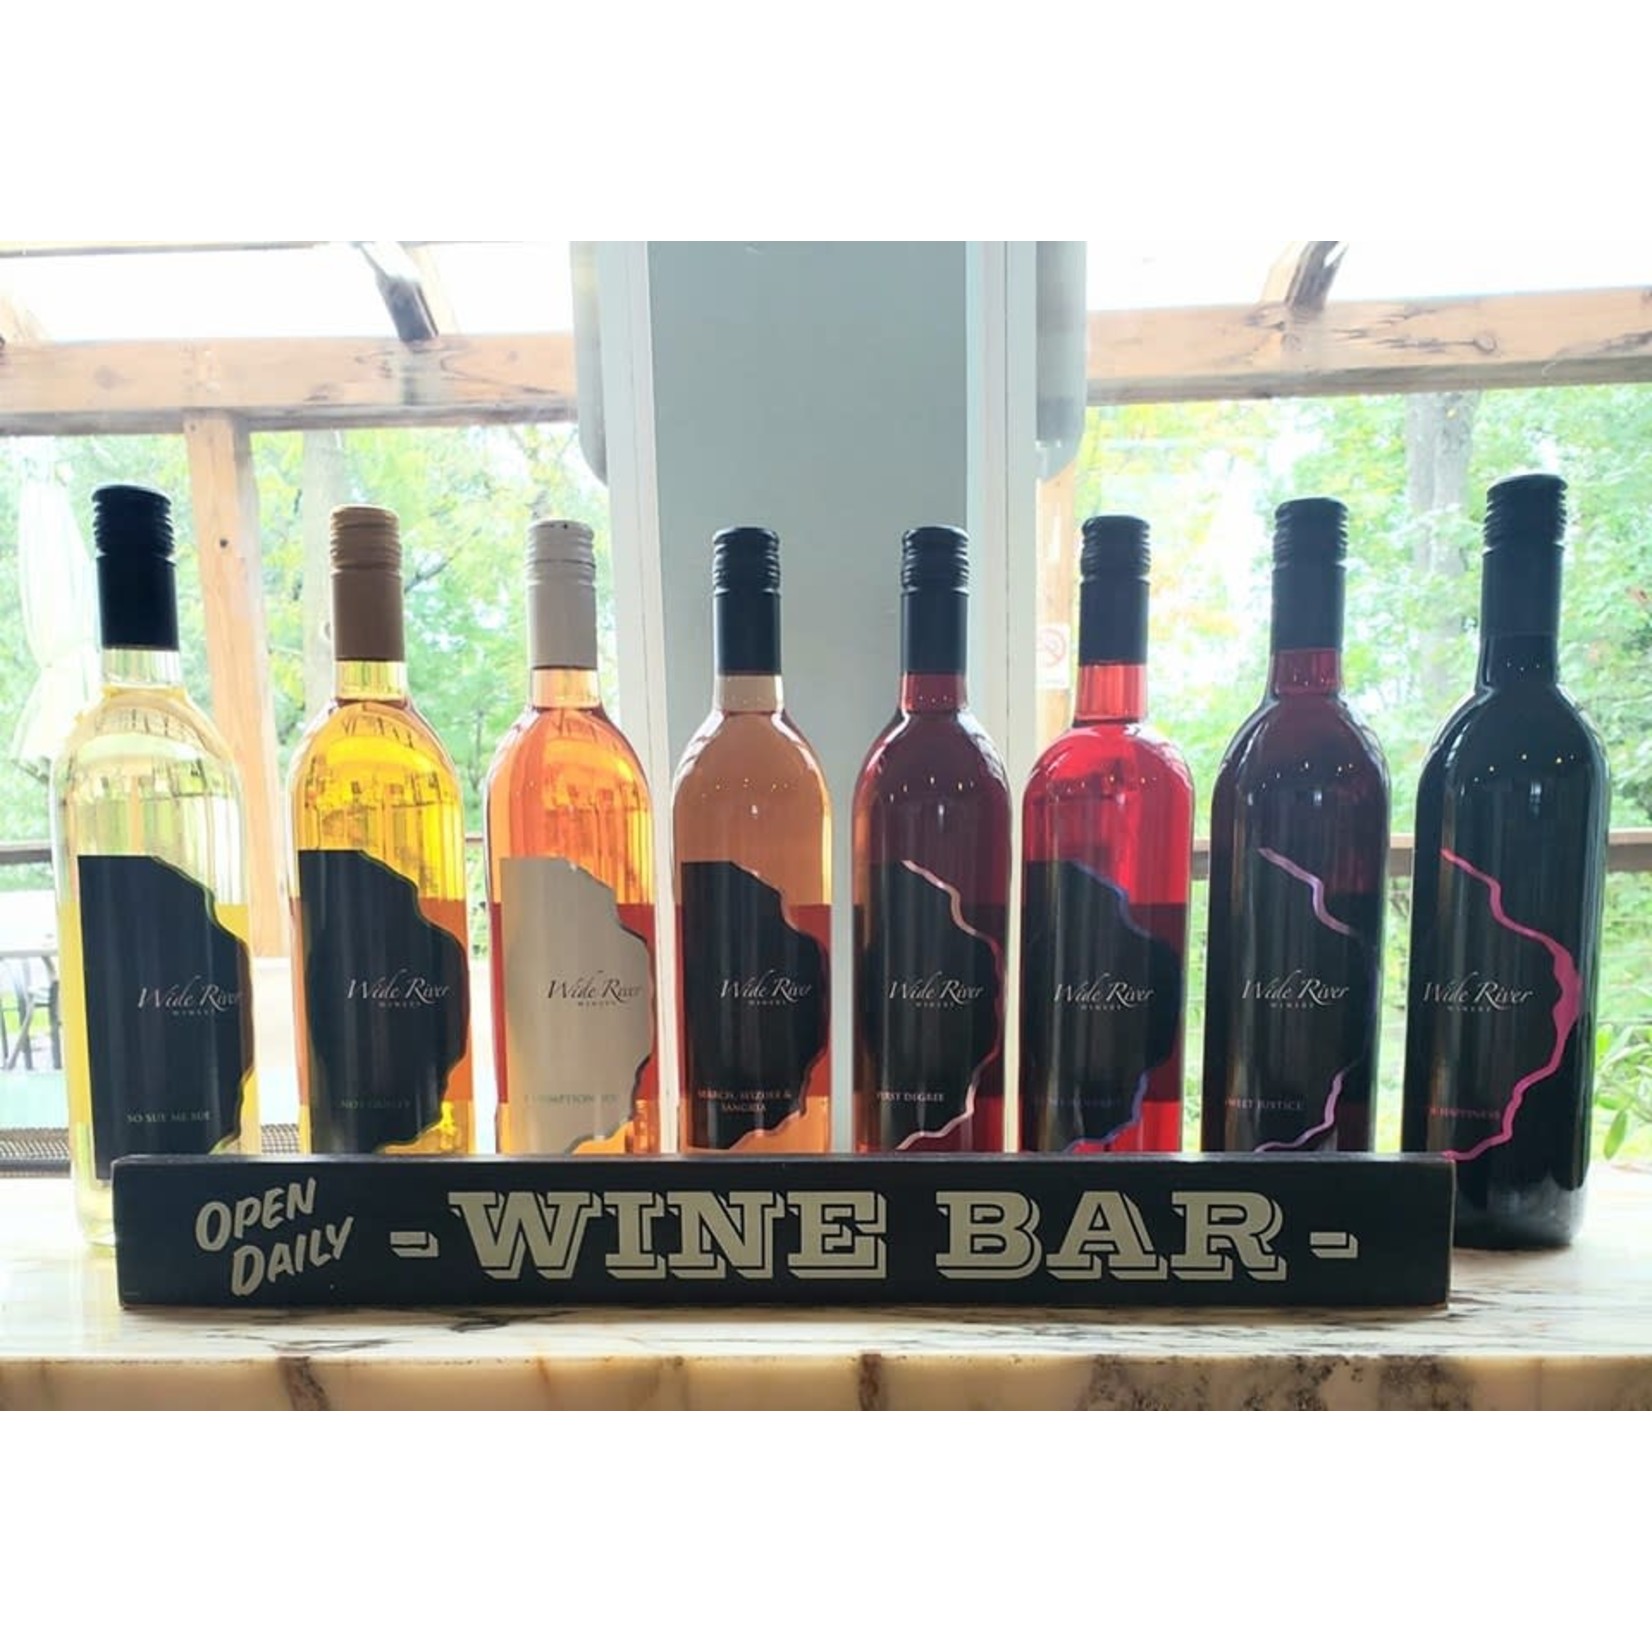 IA-Wide River Winery Tasting Room-LeClaire IA-Wide River Winery Tasting Room-LeClaire $28.00 Tasting for Two